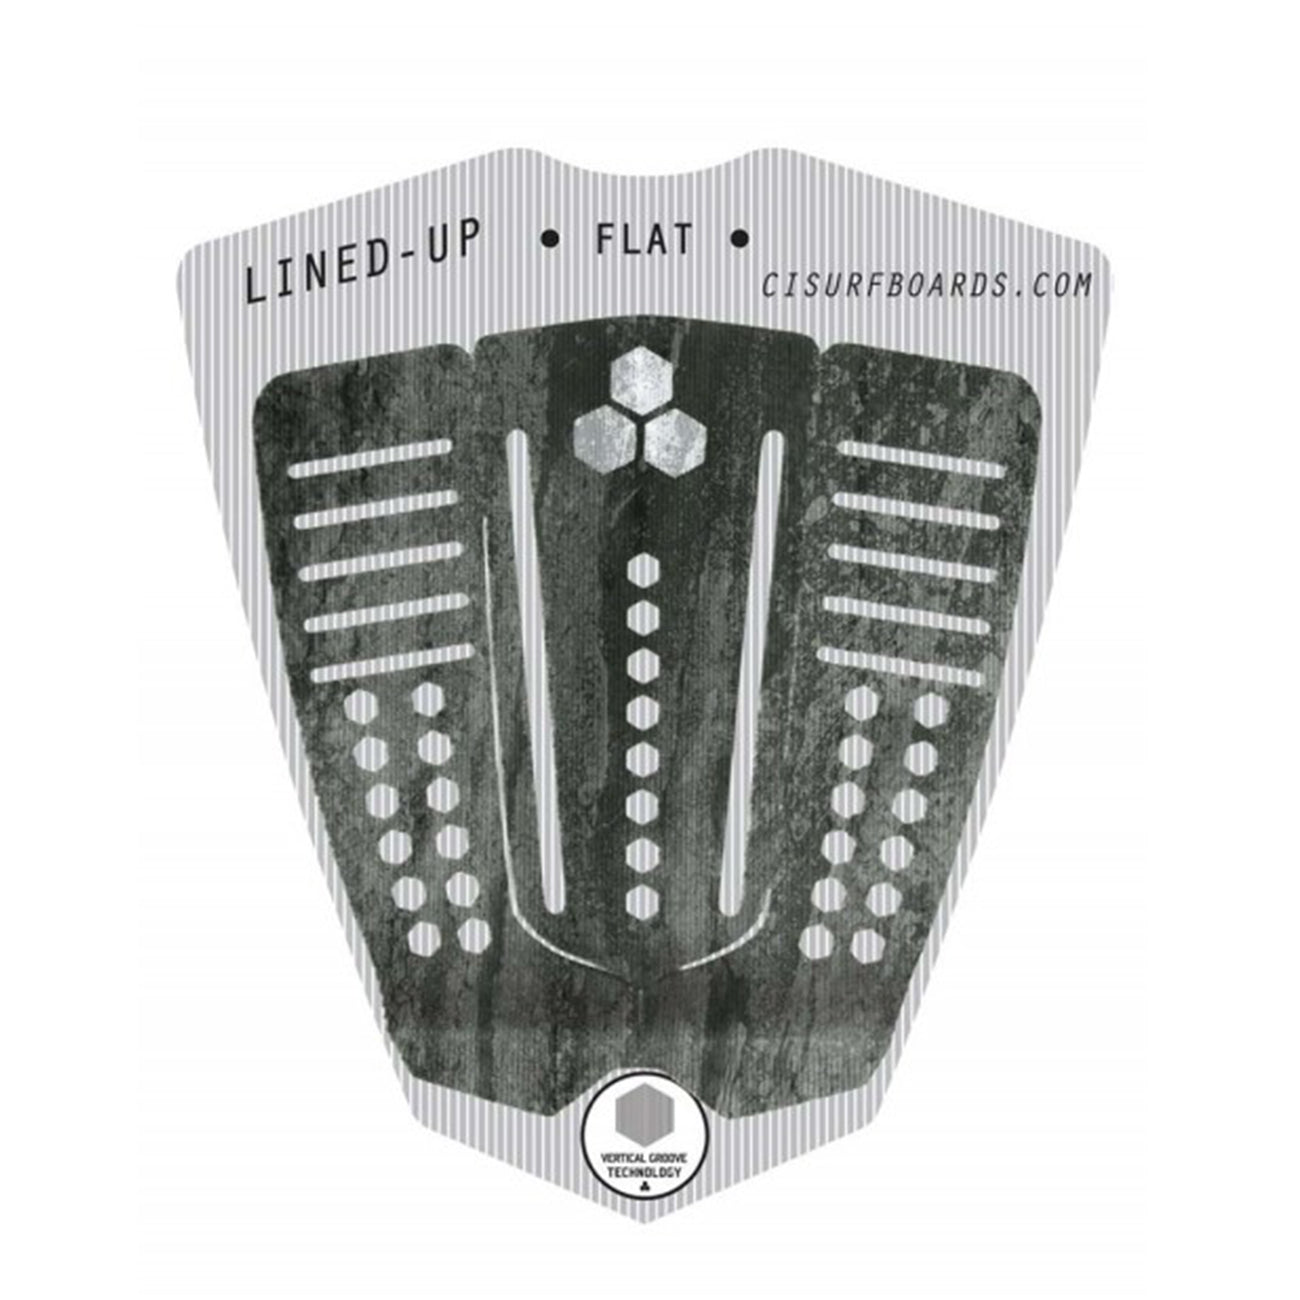 Channel Islands Surfboards Lined-Up Flat Traction Pad 3 Piece 993-Salt-and-Pepper